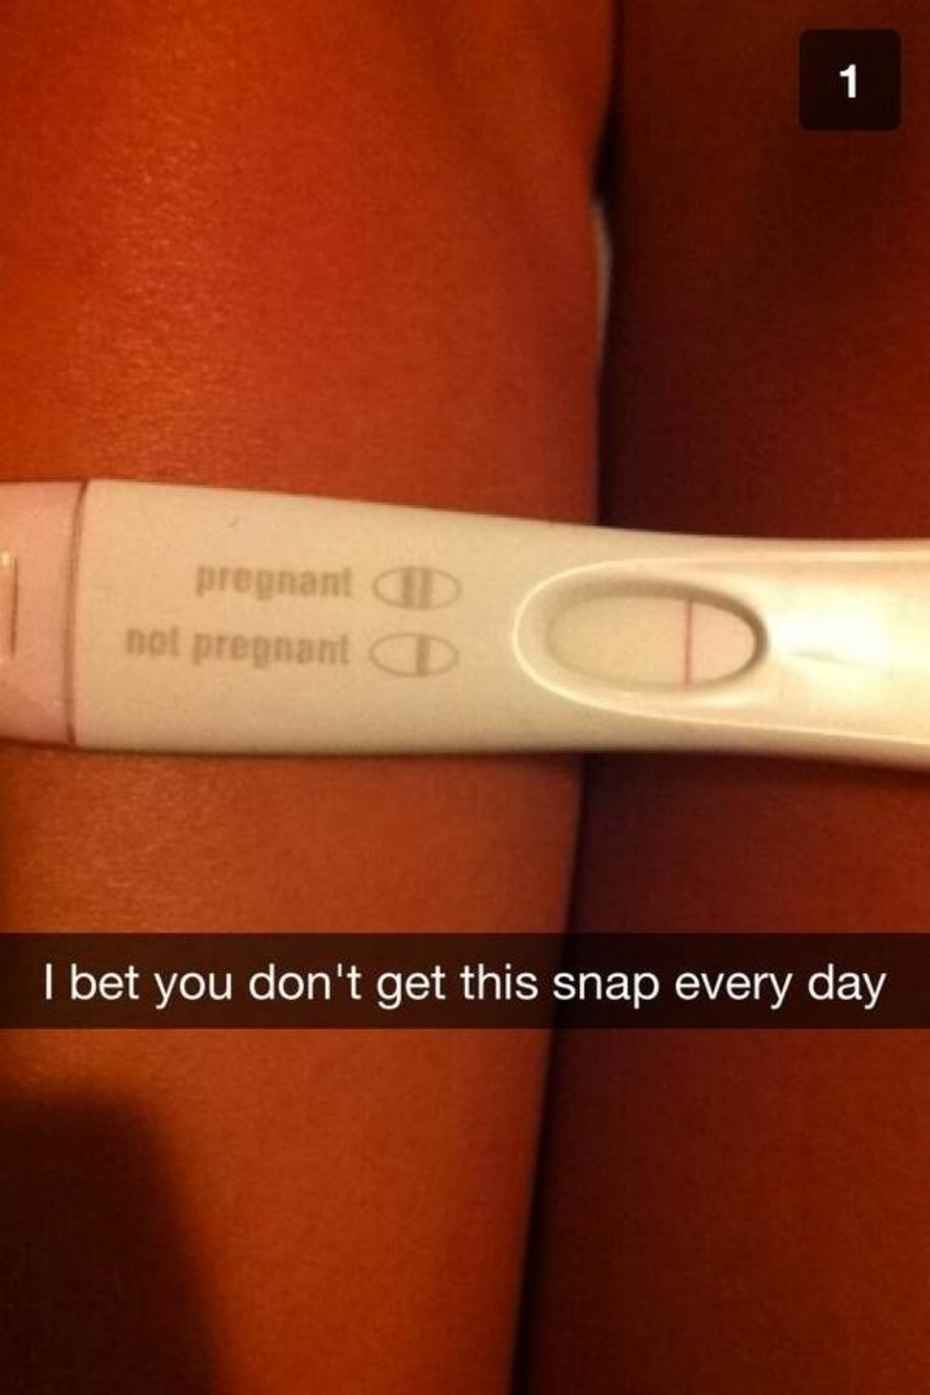 snapchat cringe snapchat pregnancy - pregnant not pregnant D I bet you don't get this snap every day